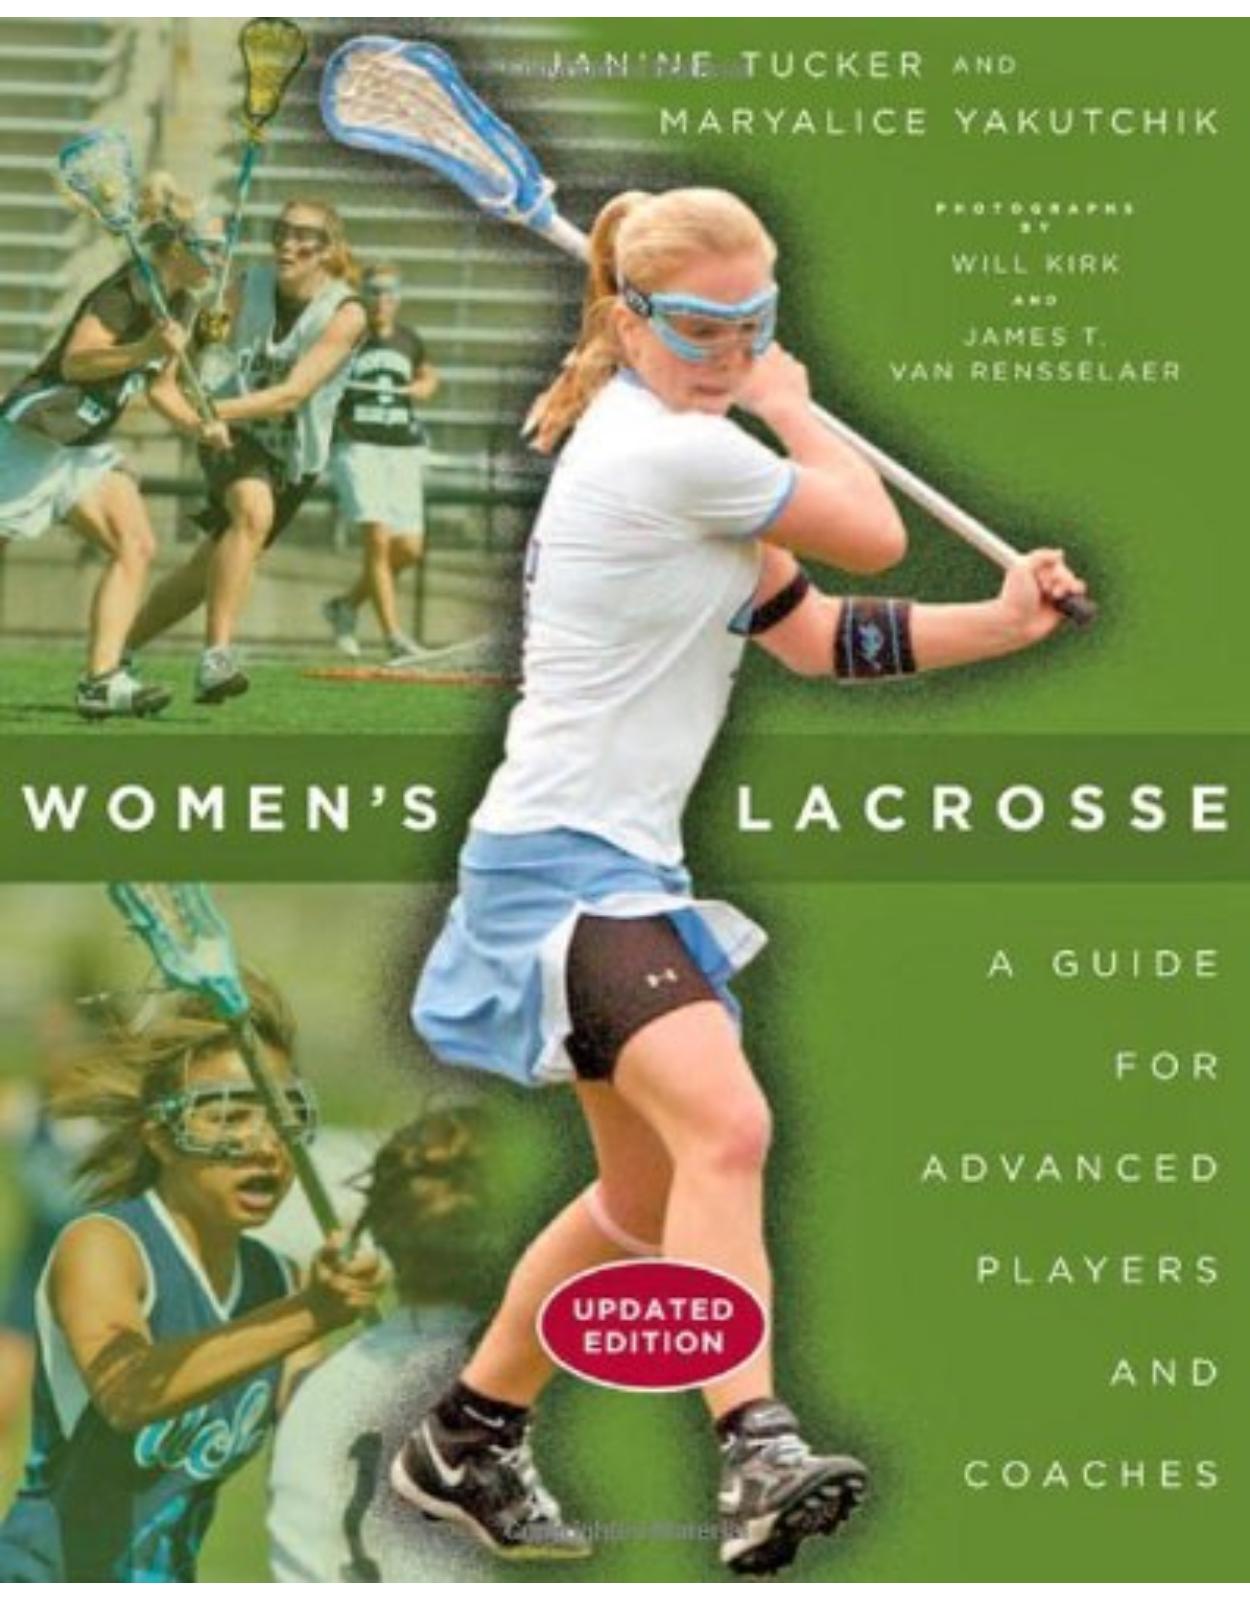 Women's Lacrosse, A Guide for Advanced Players and Coaches (Updated Edition)